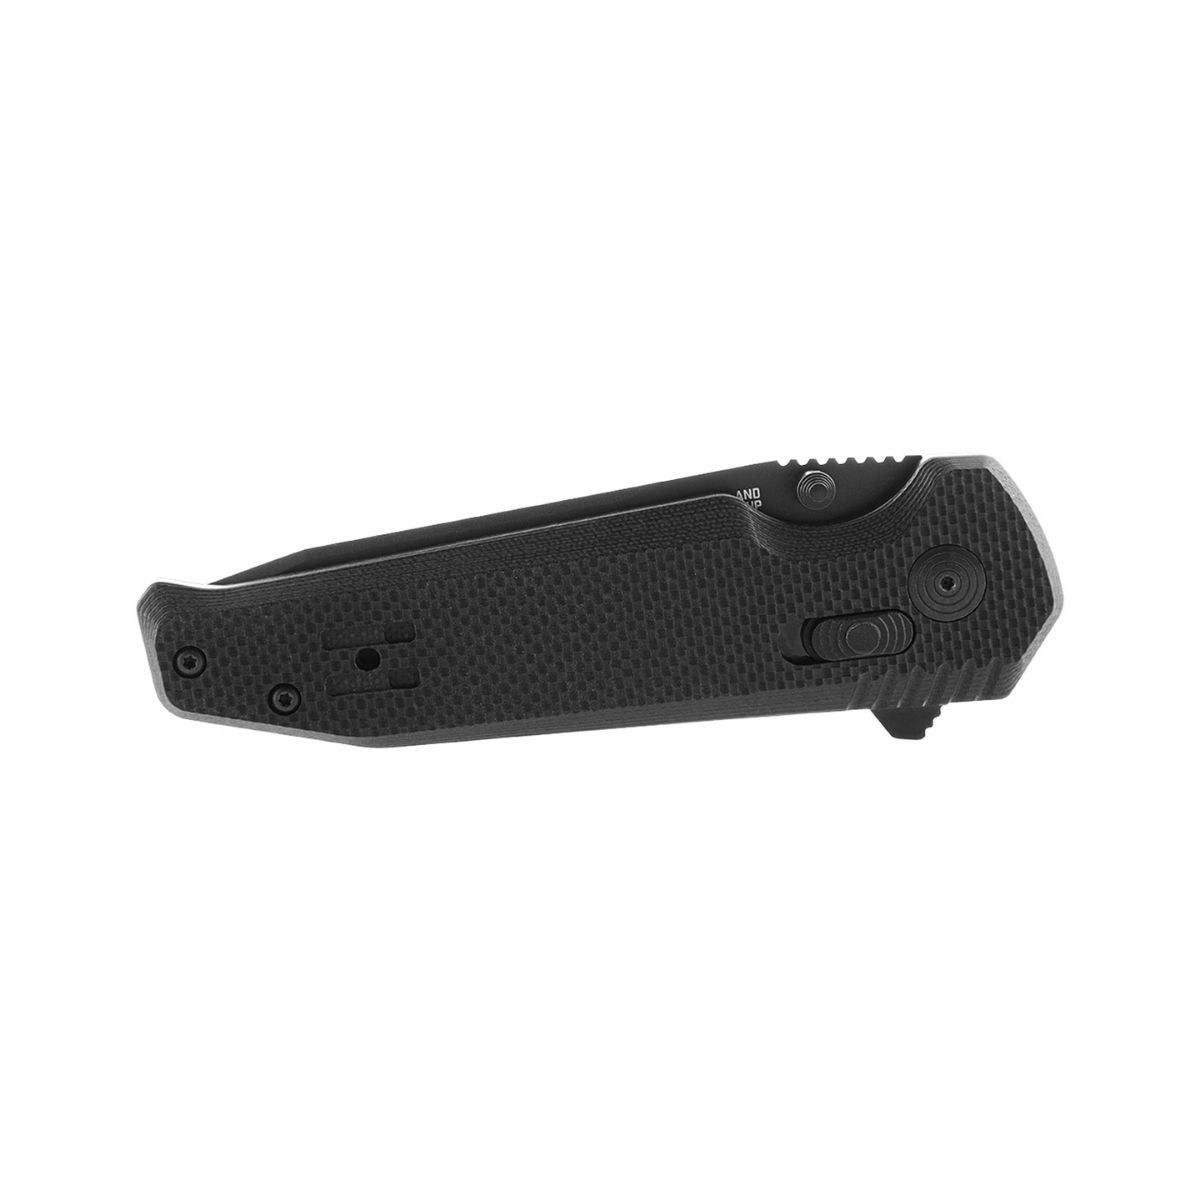 SOG Vision XR Serrated 3.36" Tanto Combo Blade Knife - 12-57-02-57 - Outdoor Travel Gear 5